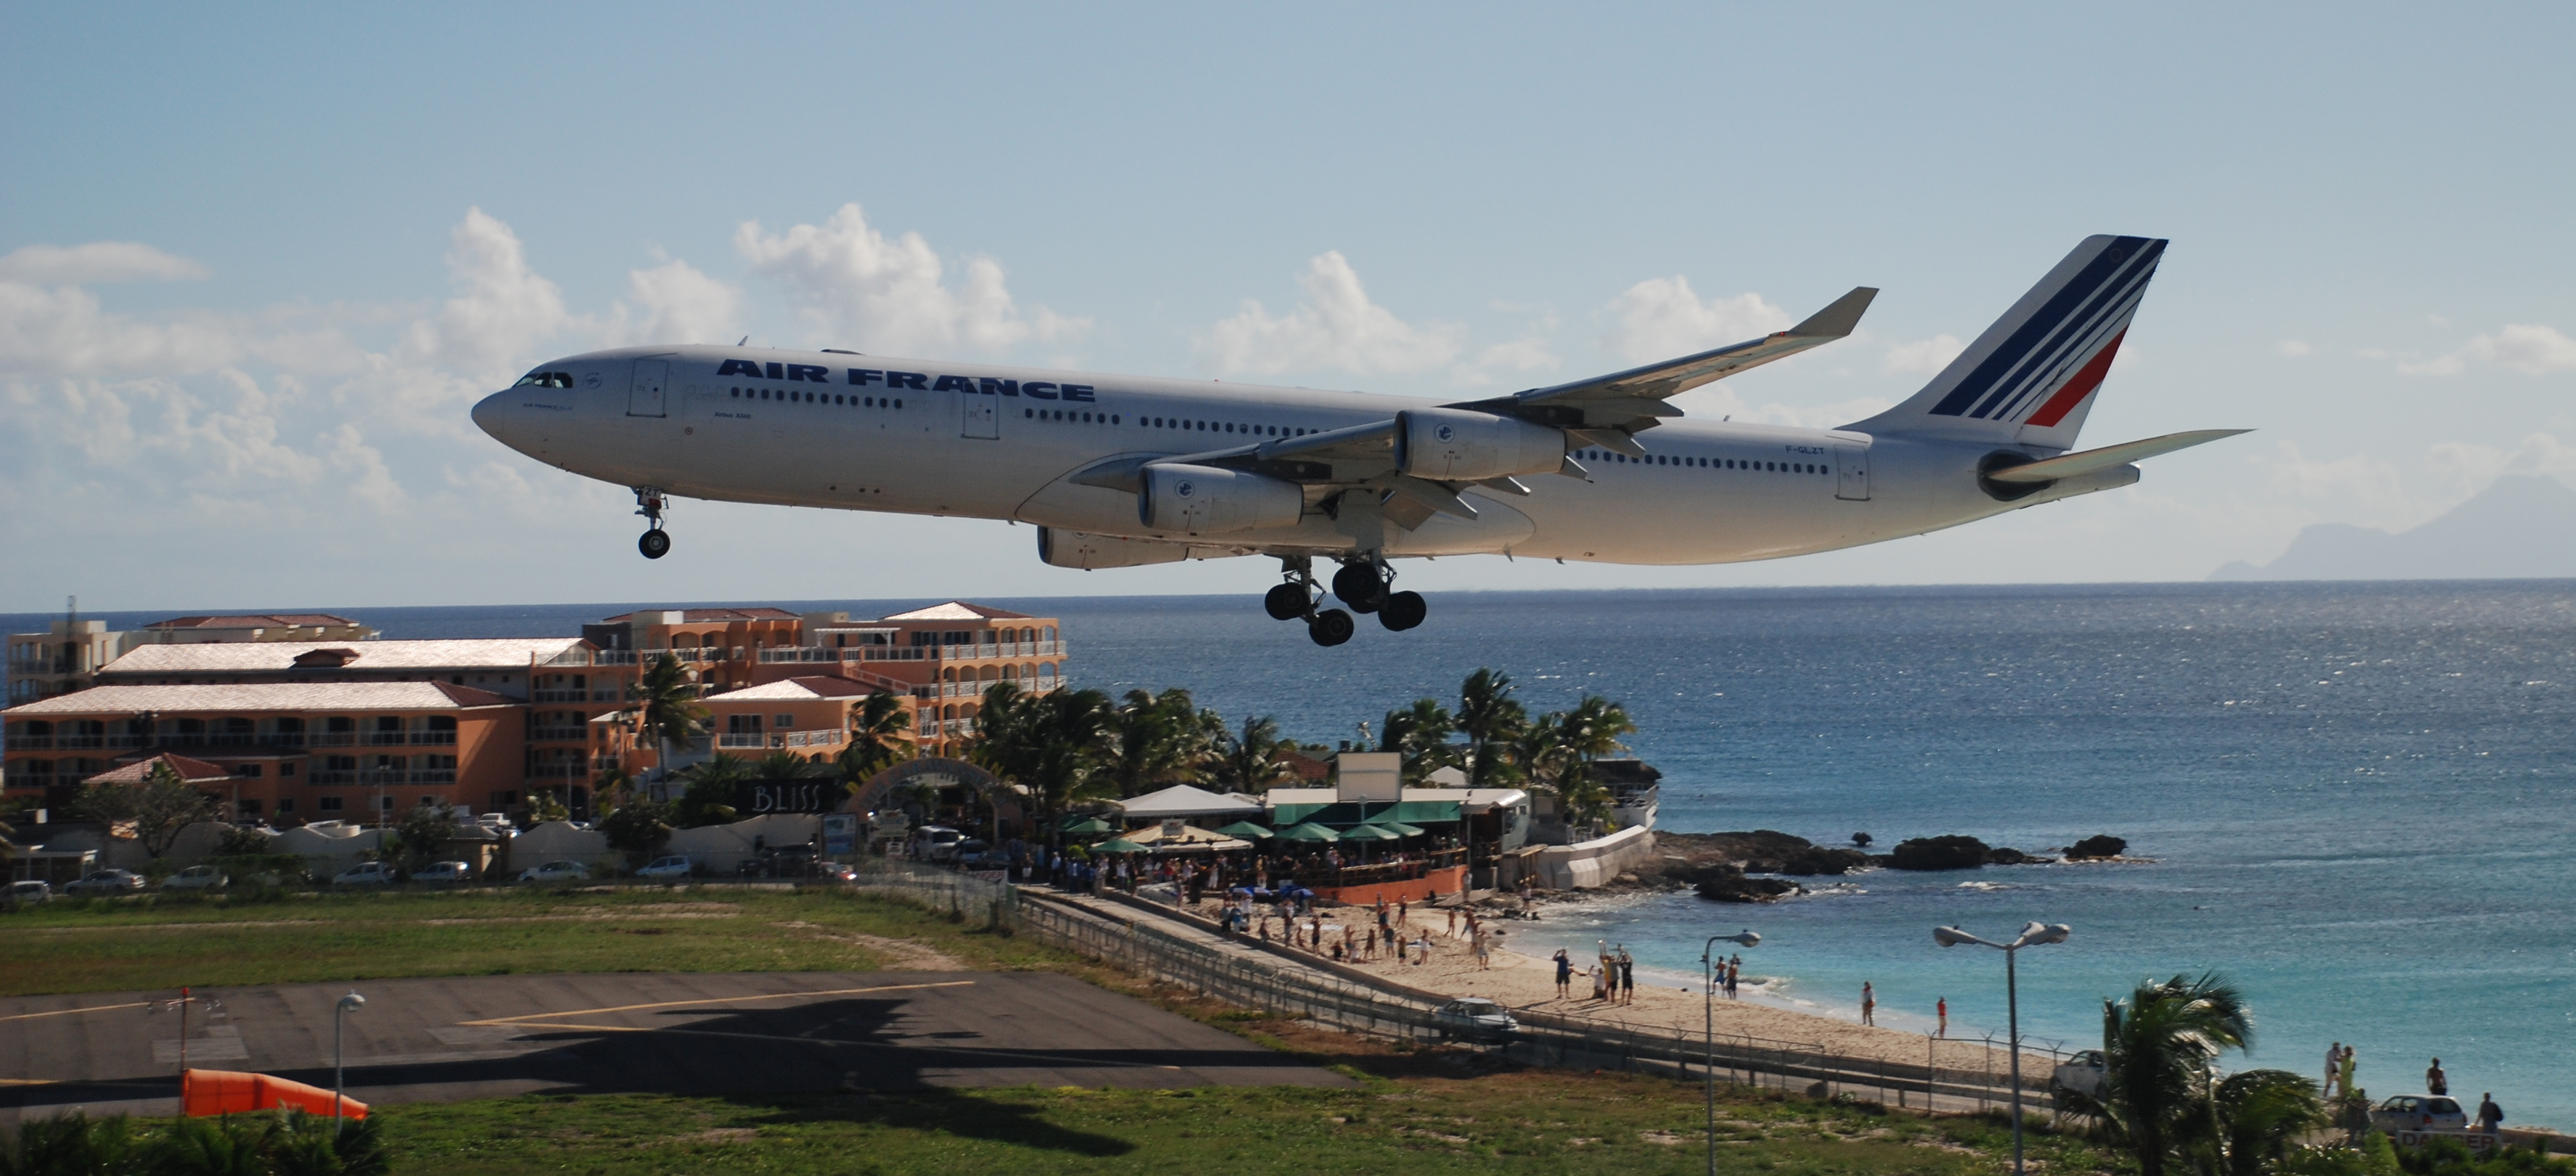 An Air France Airbus A340 lands at SXM. Image from alljengi / Flickr CC.